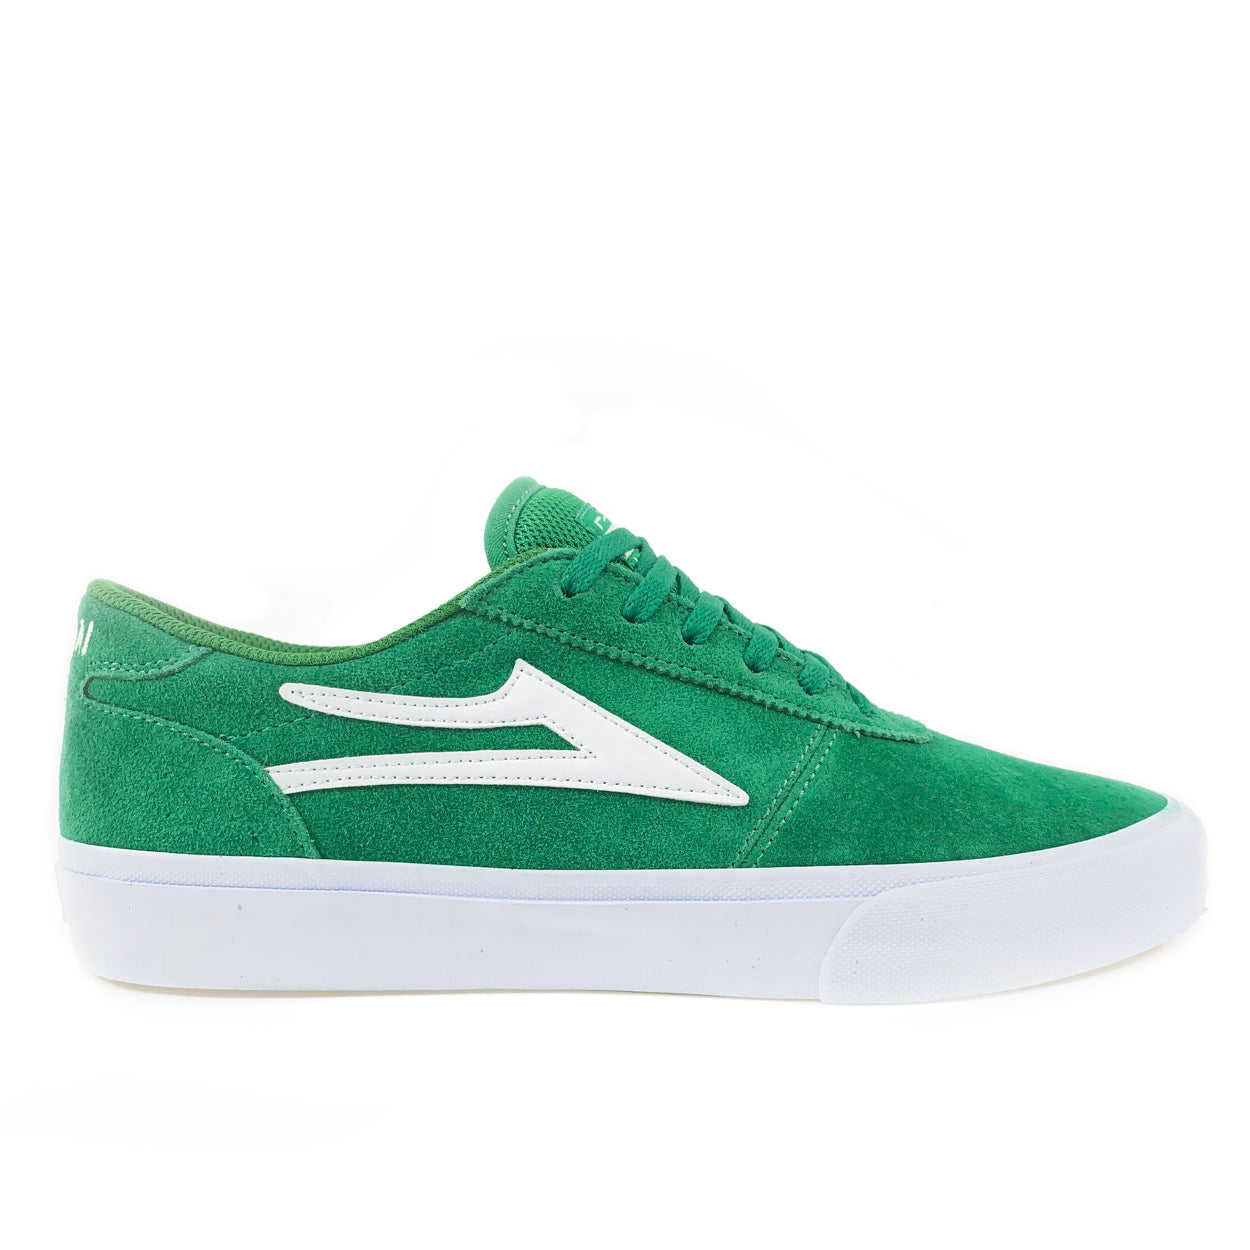 Lakai Manchester Shoes - Grass Suede - Prime Delux Store